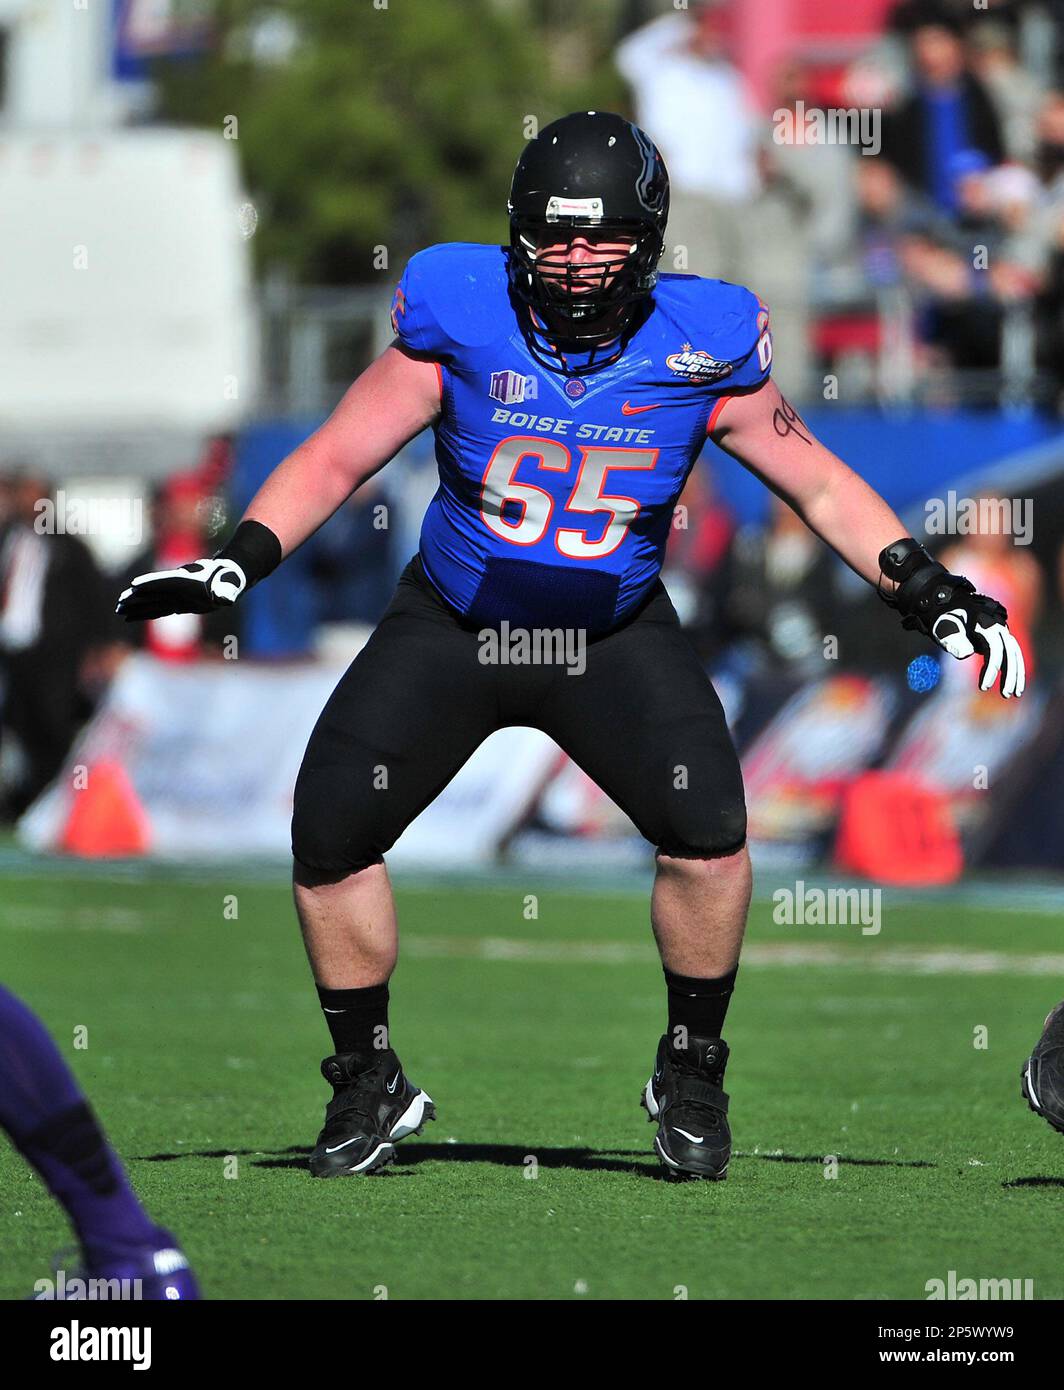 December 22, 2012: Matt Paradis #65 of Boise State during the Maaco Las  Vegas Bowl Football game between the Boise State Broncos and the Washington  Huskies at Sam Boyd Stadium in Las